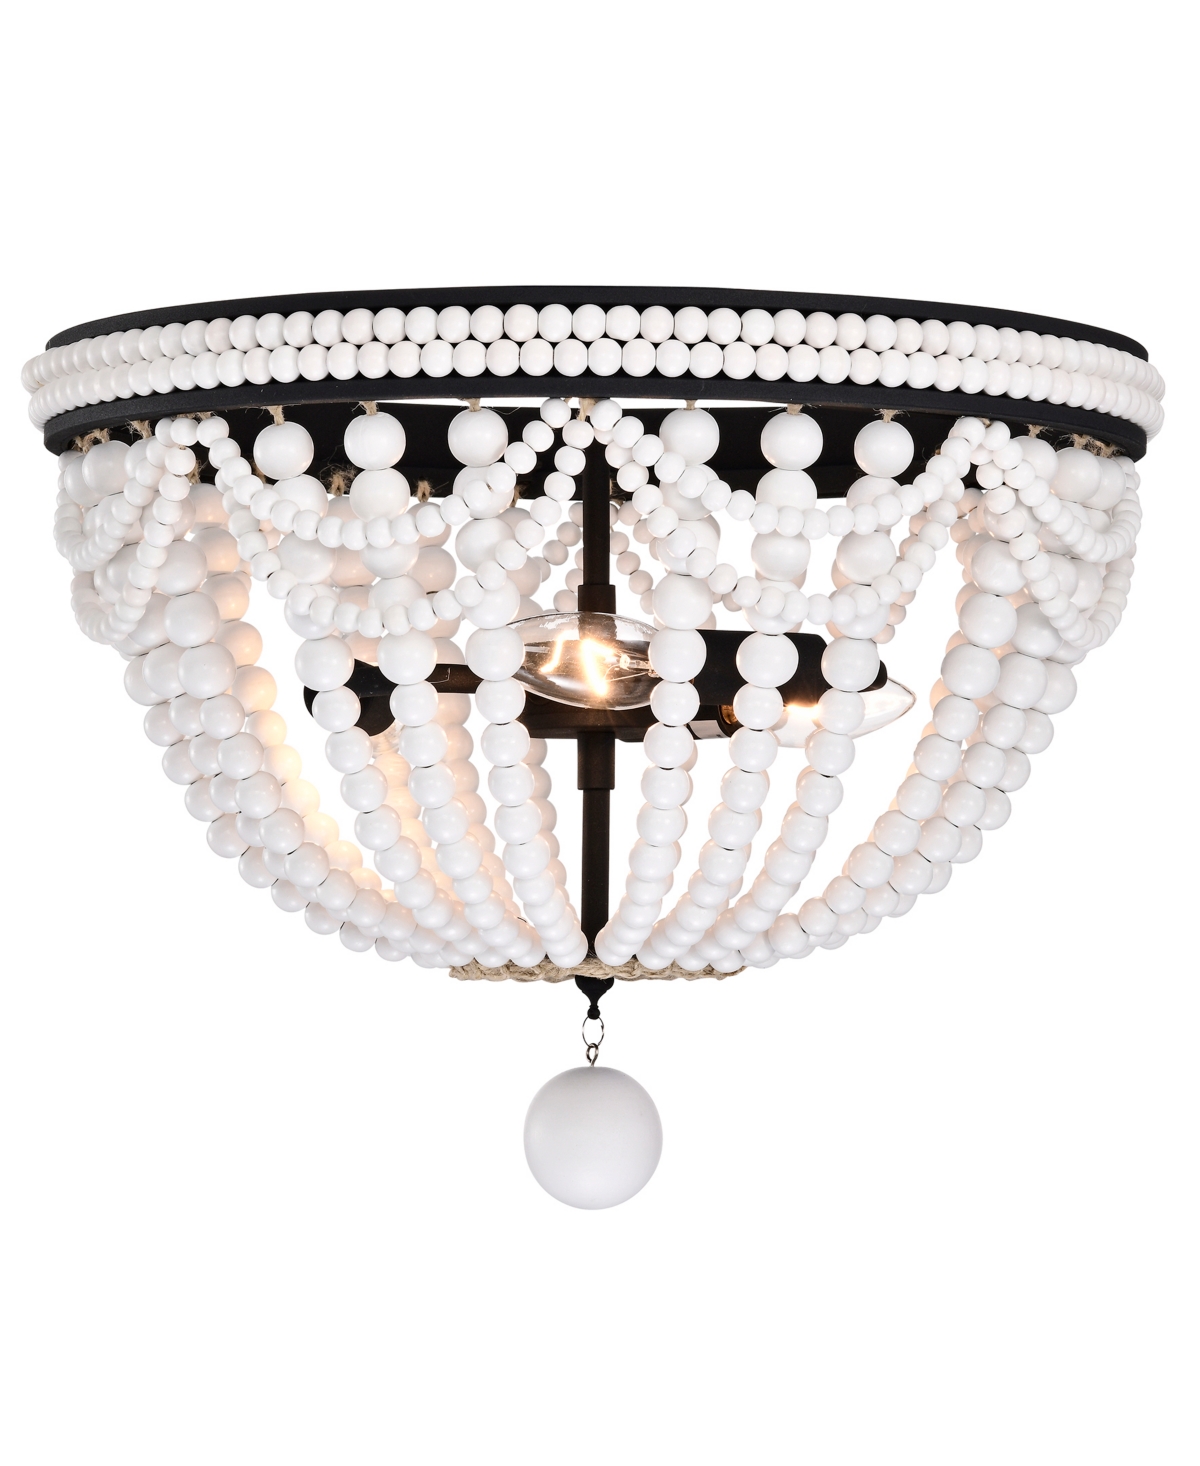 Home Accessories Hudson 16" Indoor Finish Flush Mount Ceiling Light With Light Kit In Iron Black And Gloss White